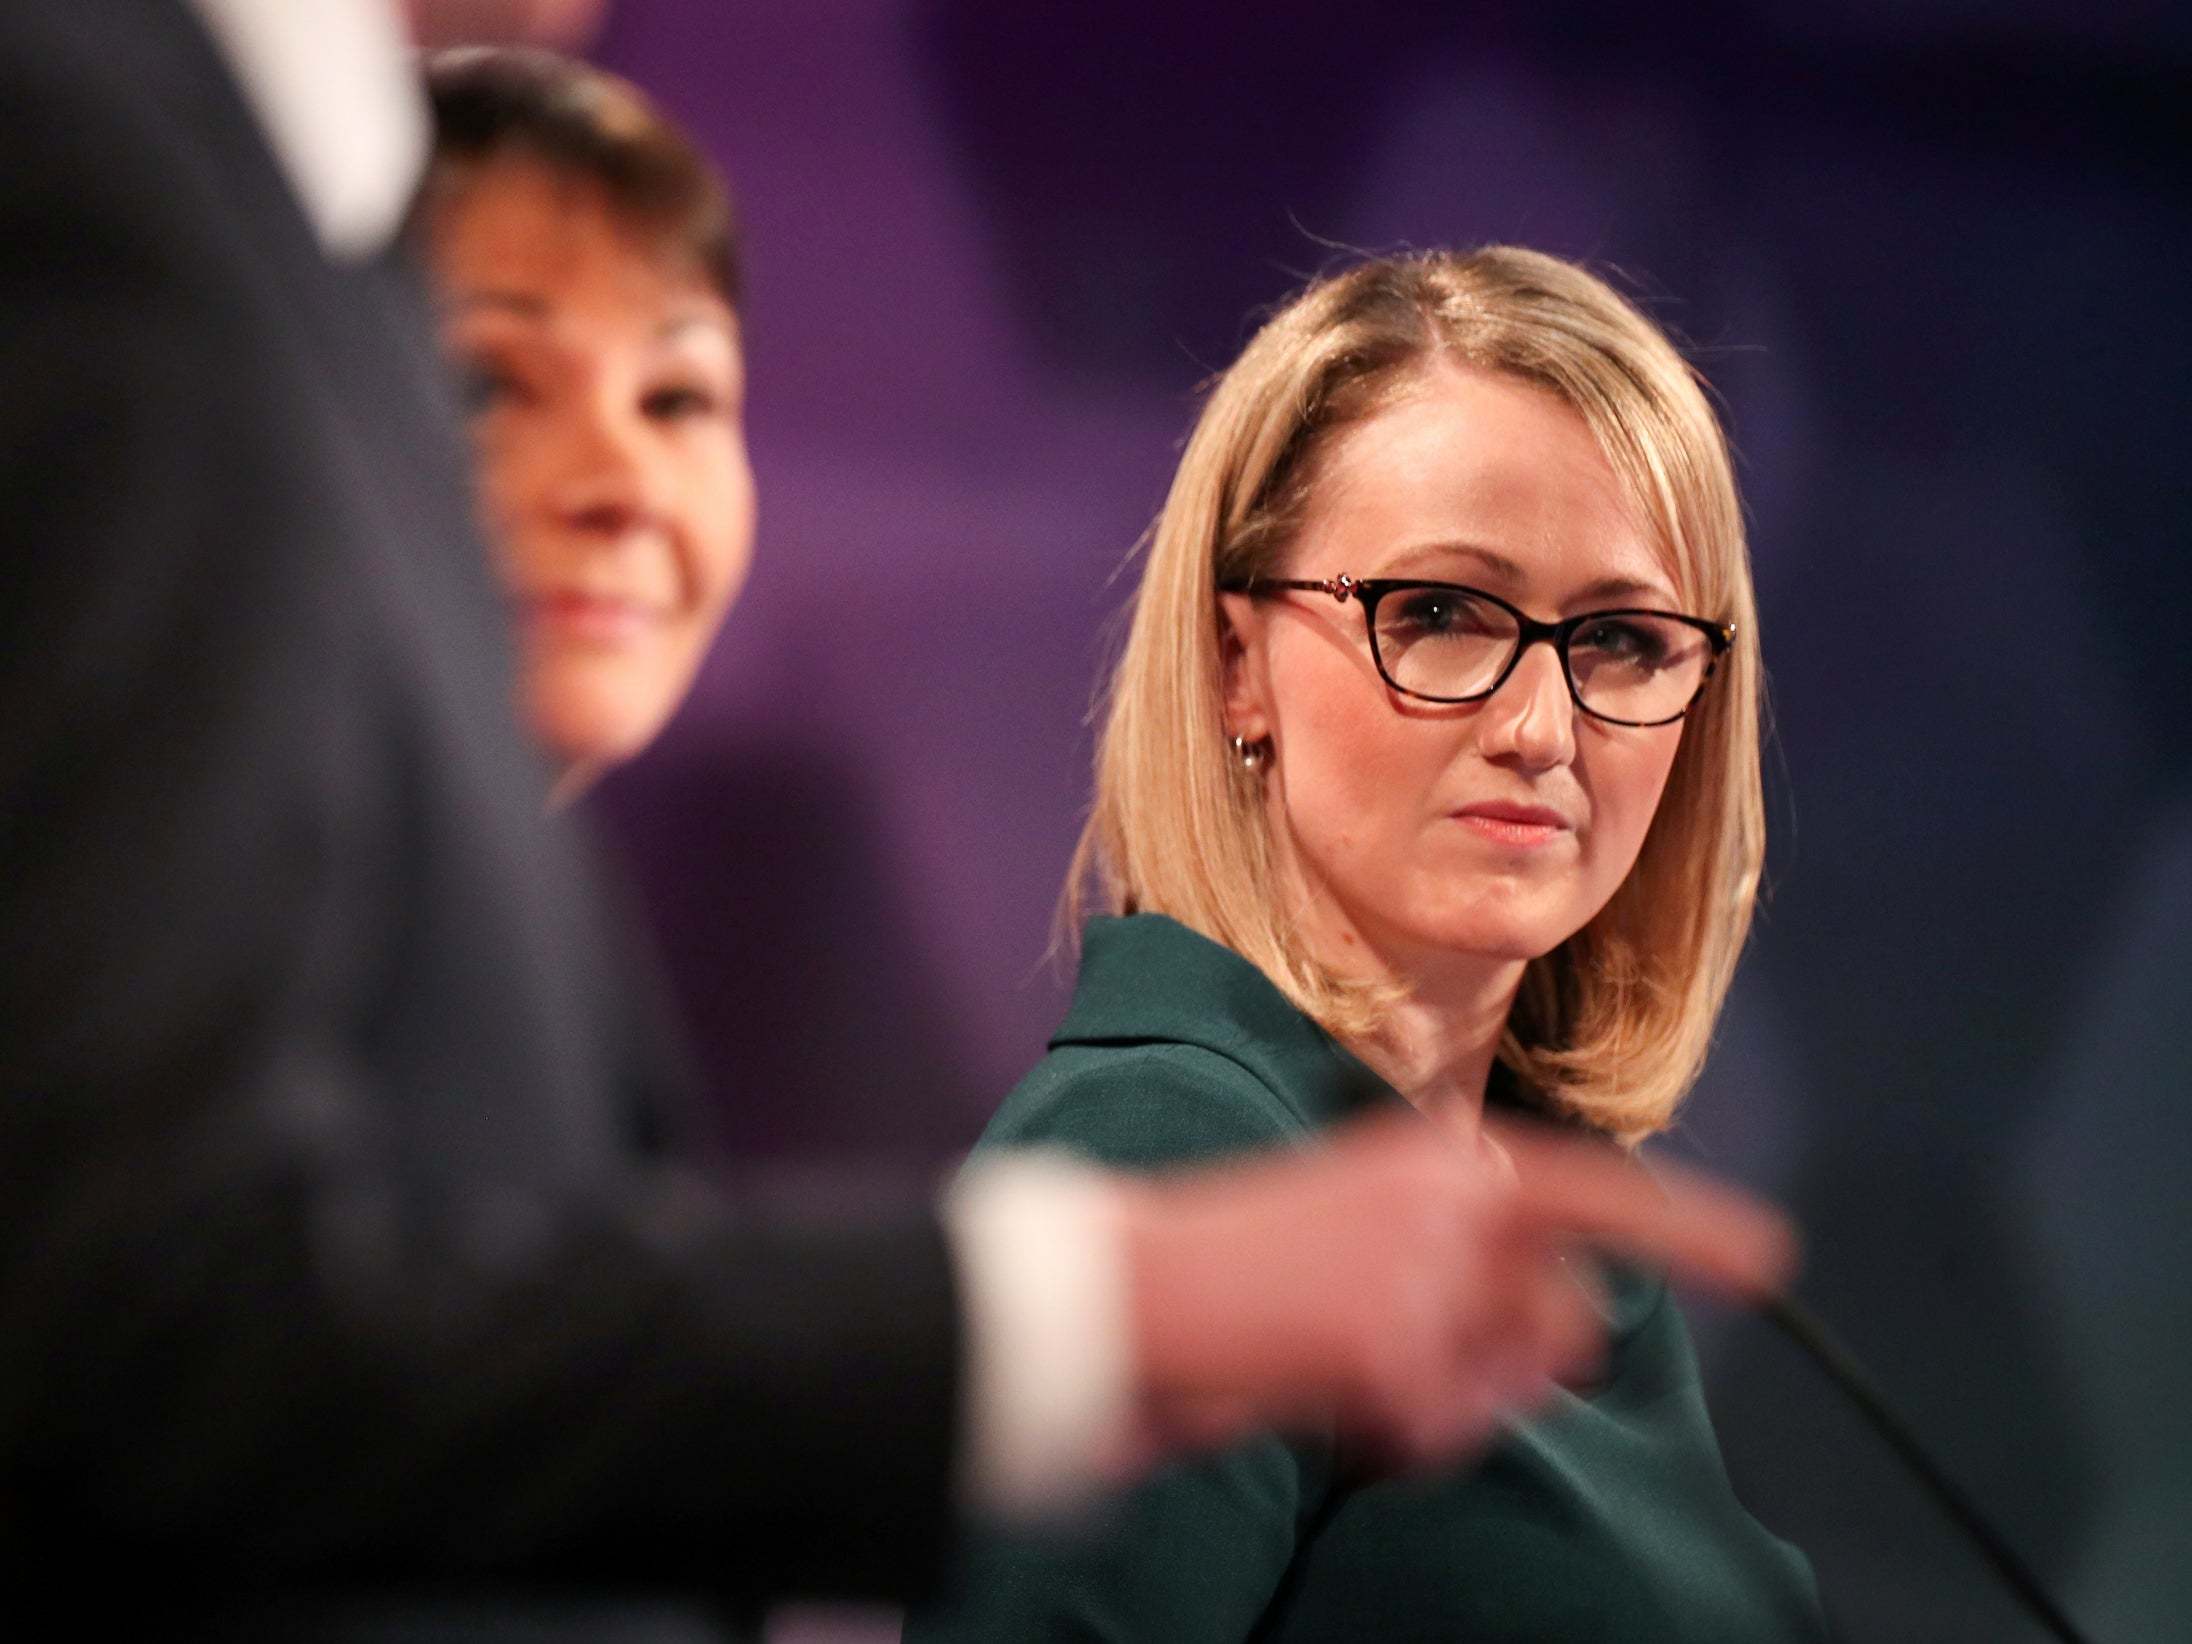 Rebecca Long-Bailey came out just ahead in the debate